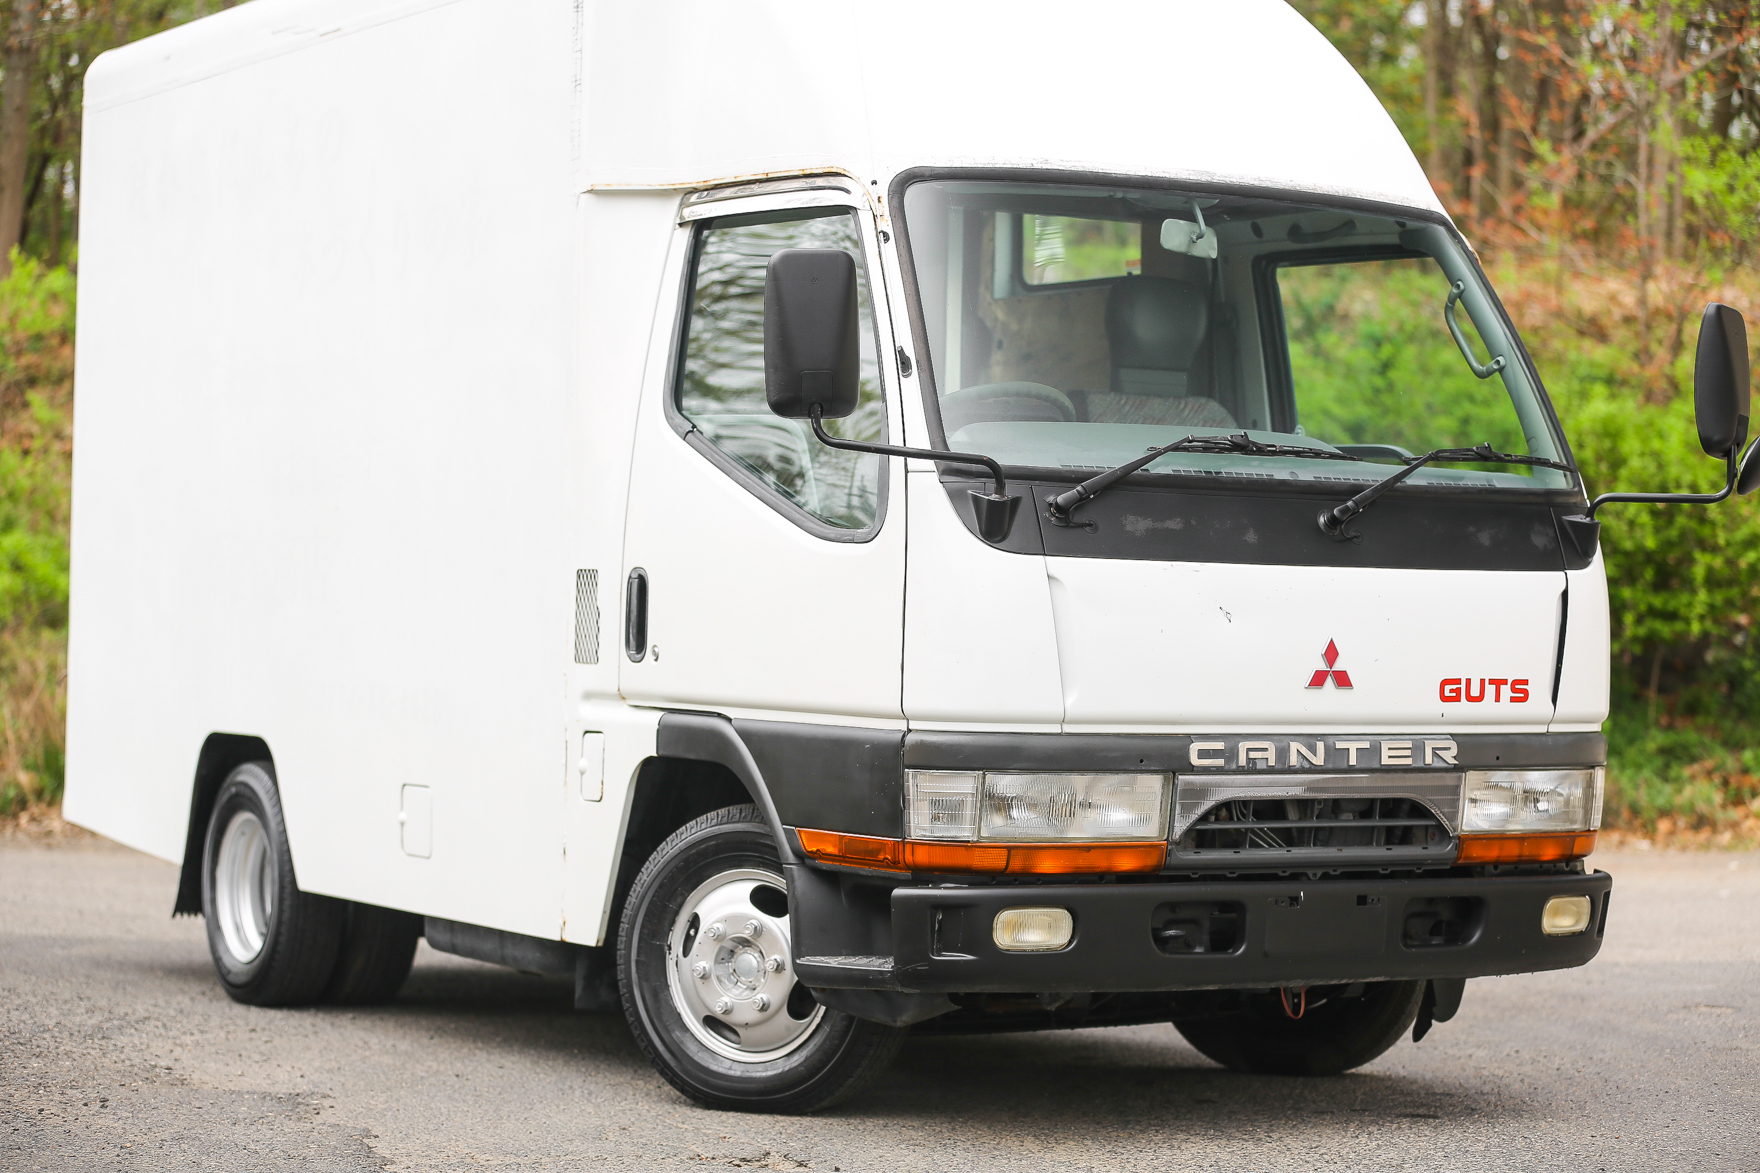 Mitsubishi Canter Guts - Available for $16,599